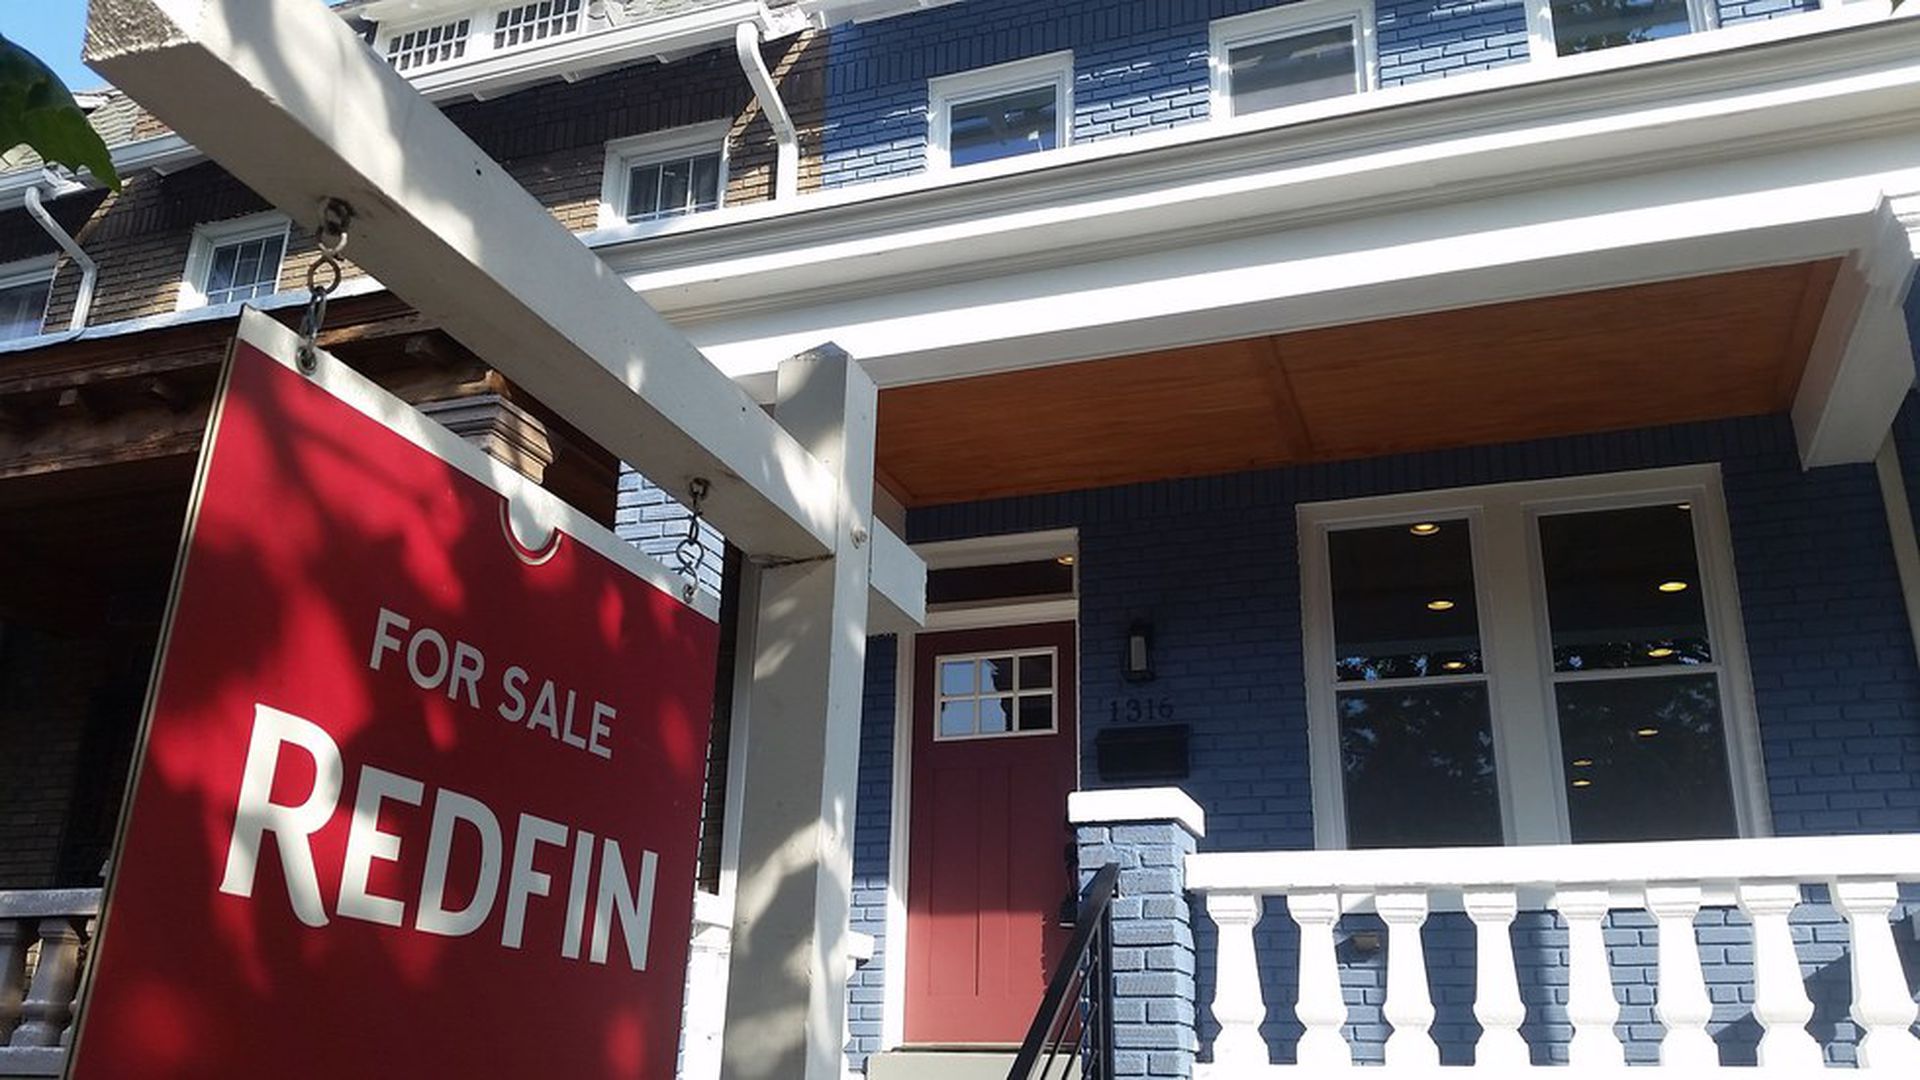 Real Estate Pany Redfin Files For Ipo